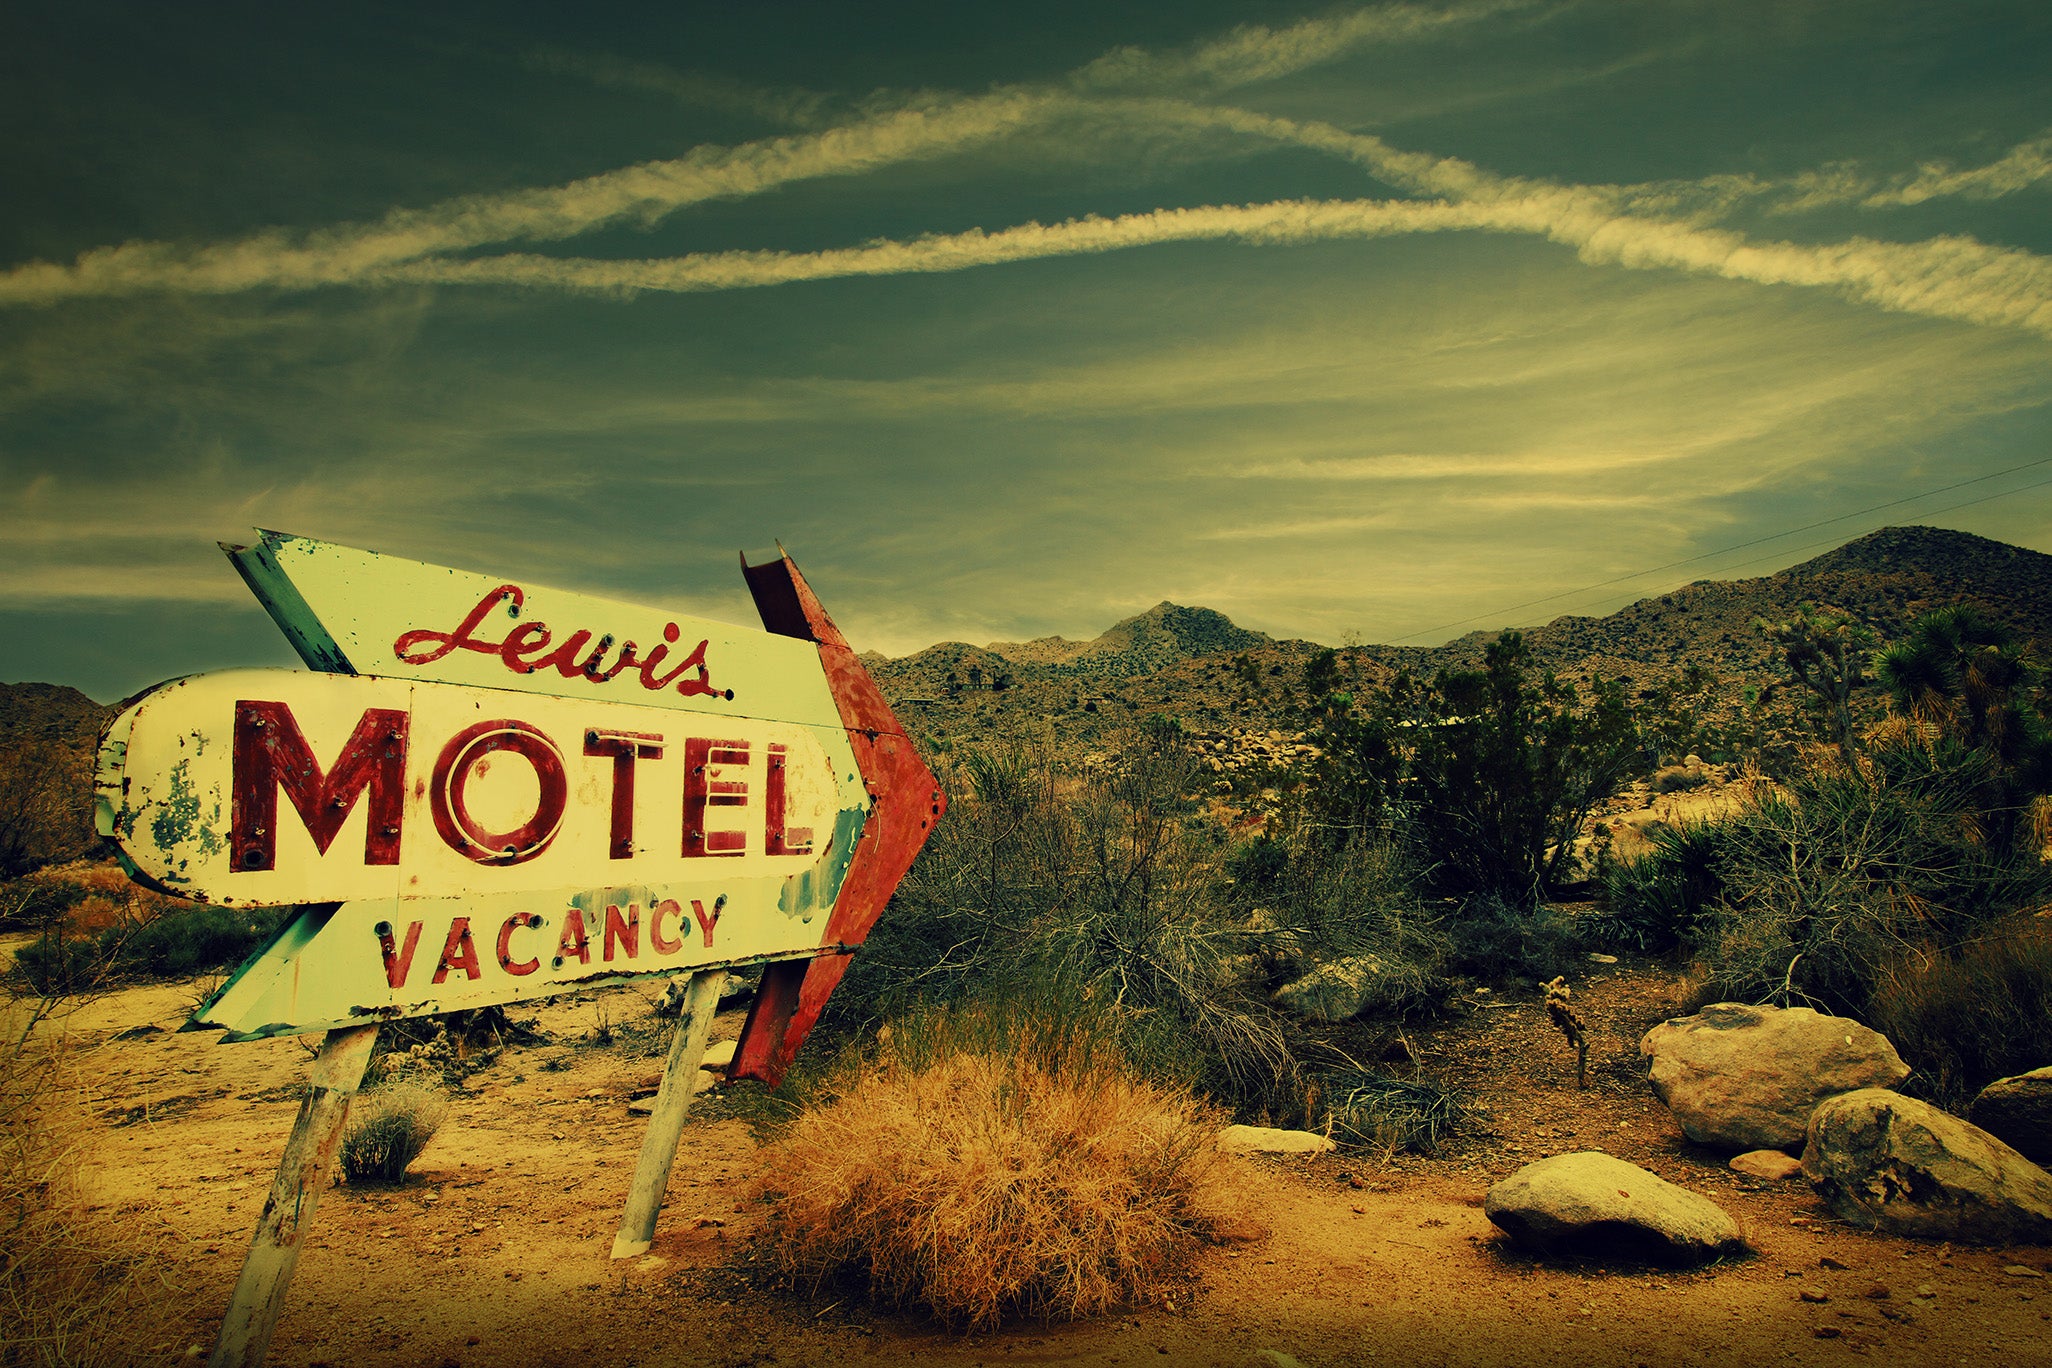 "Lewis Motel" by Shannon Black is a fine art photograph that showcases a vintage hotel sign standing in the the Joshua Tree desert, creating a striking juxtaposition between the remnants of the past and the timeless beauty of nature.